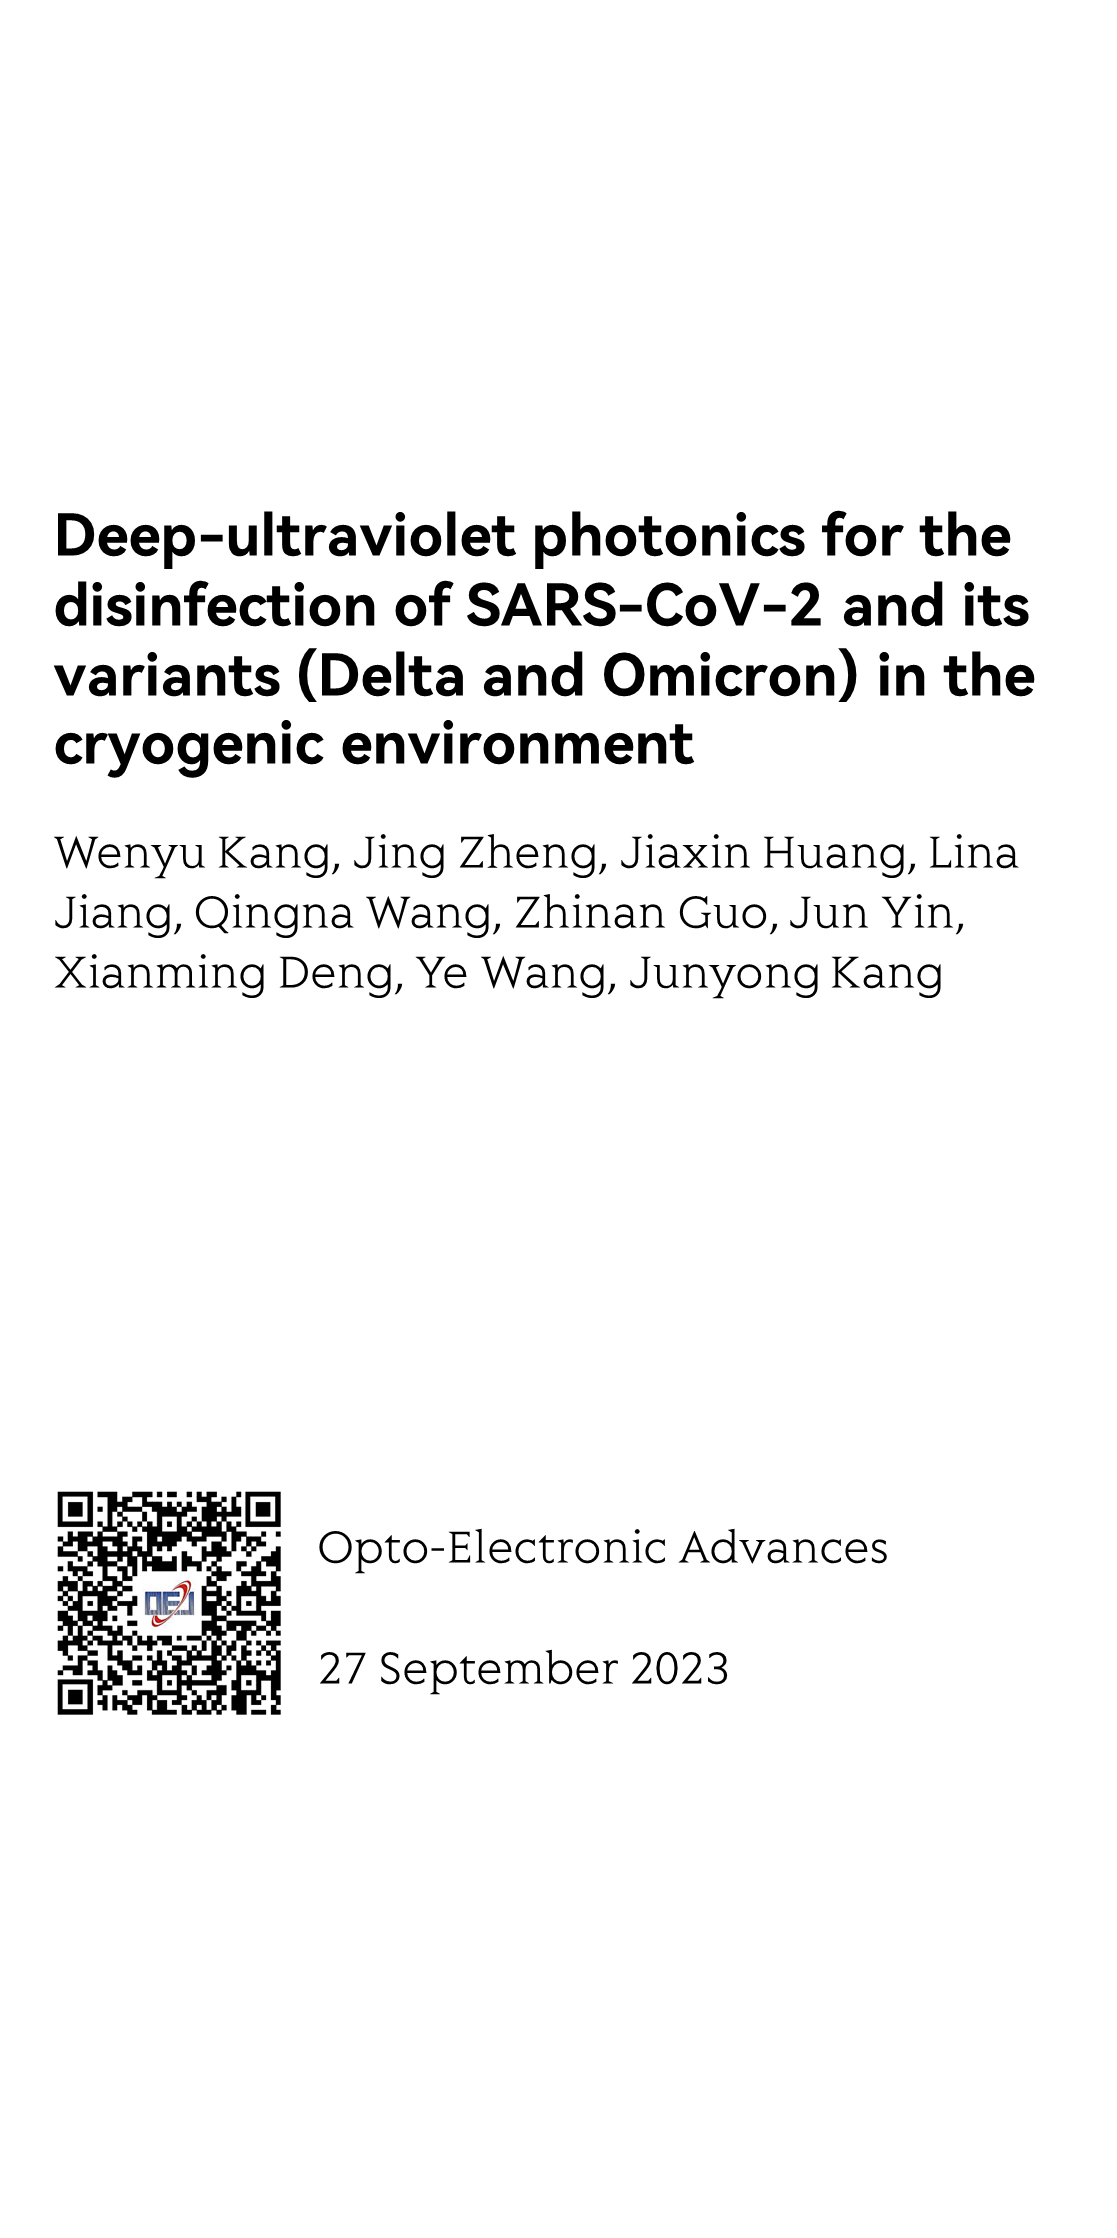 Deep-ultraviolet photonics for the disinfection of SARS-CoV-2 and its variants (Delta and Omicron) in the cryogenic environment_1